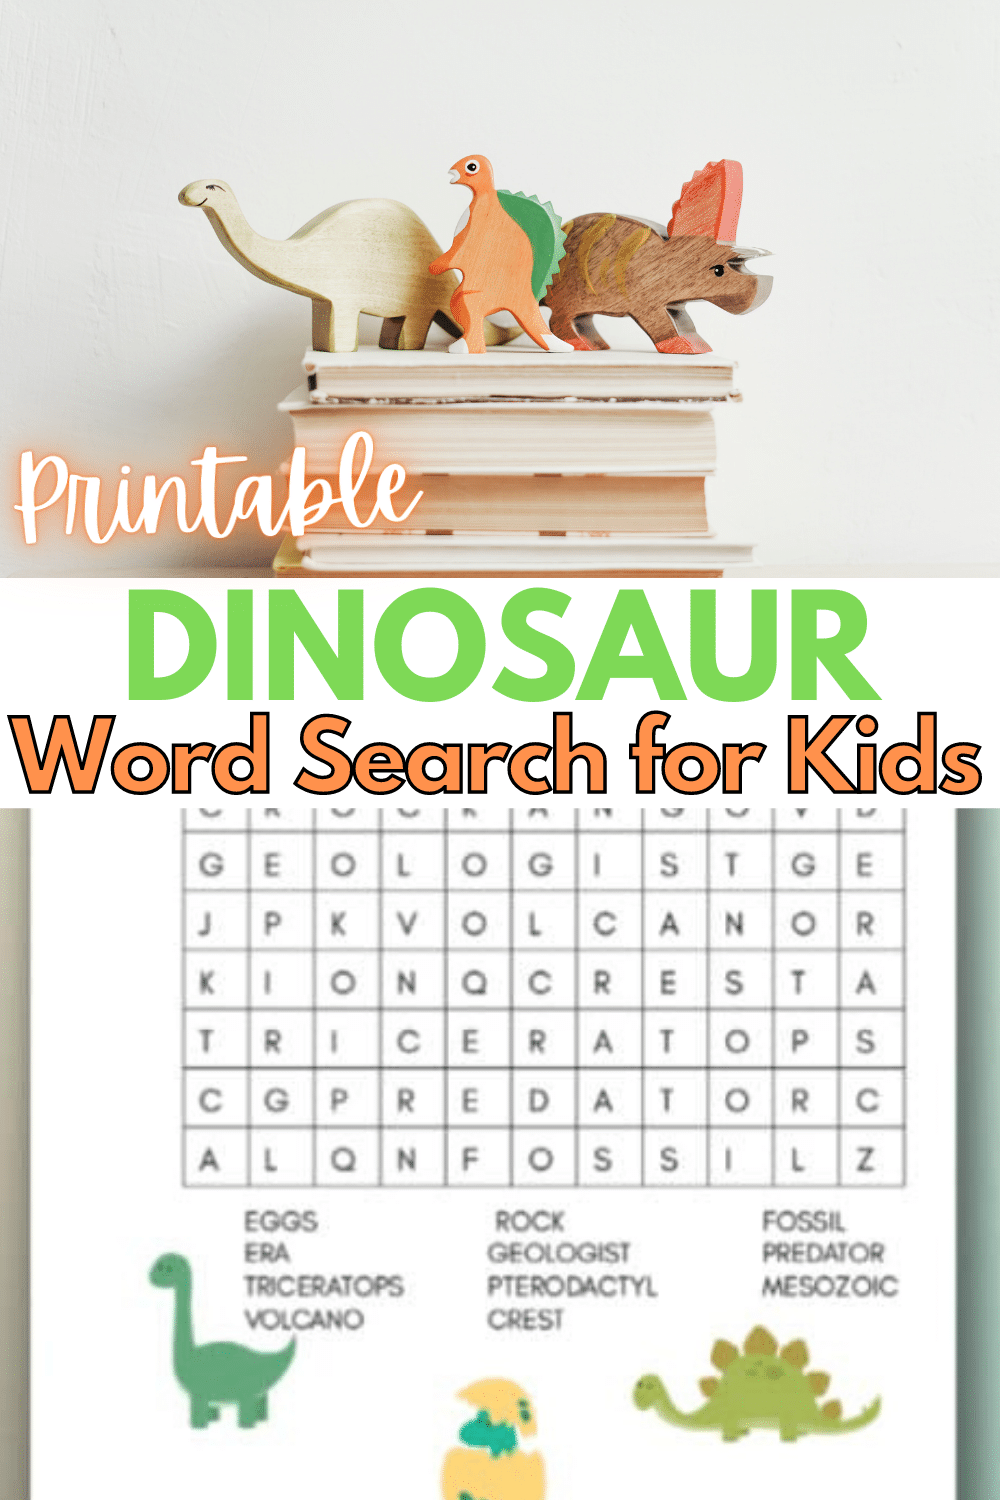 This free printable dinosaur word search for kids is fun and perfect for those dinosaur-obsessed kids. A great educational activity that is all about dinos. #dinosaurs #wordsearch #printables via @wondermomwannab